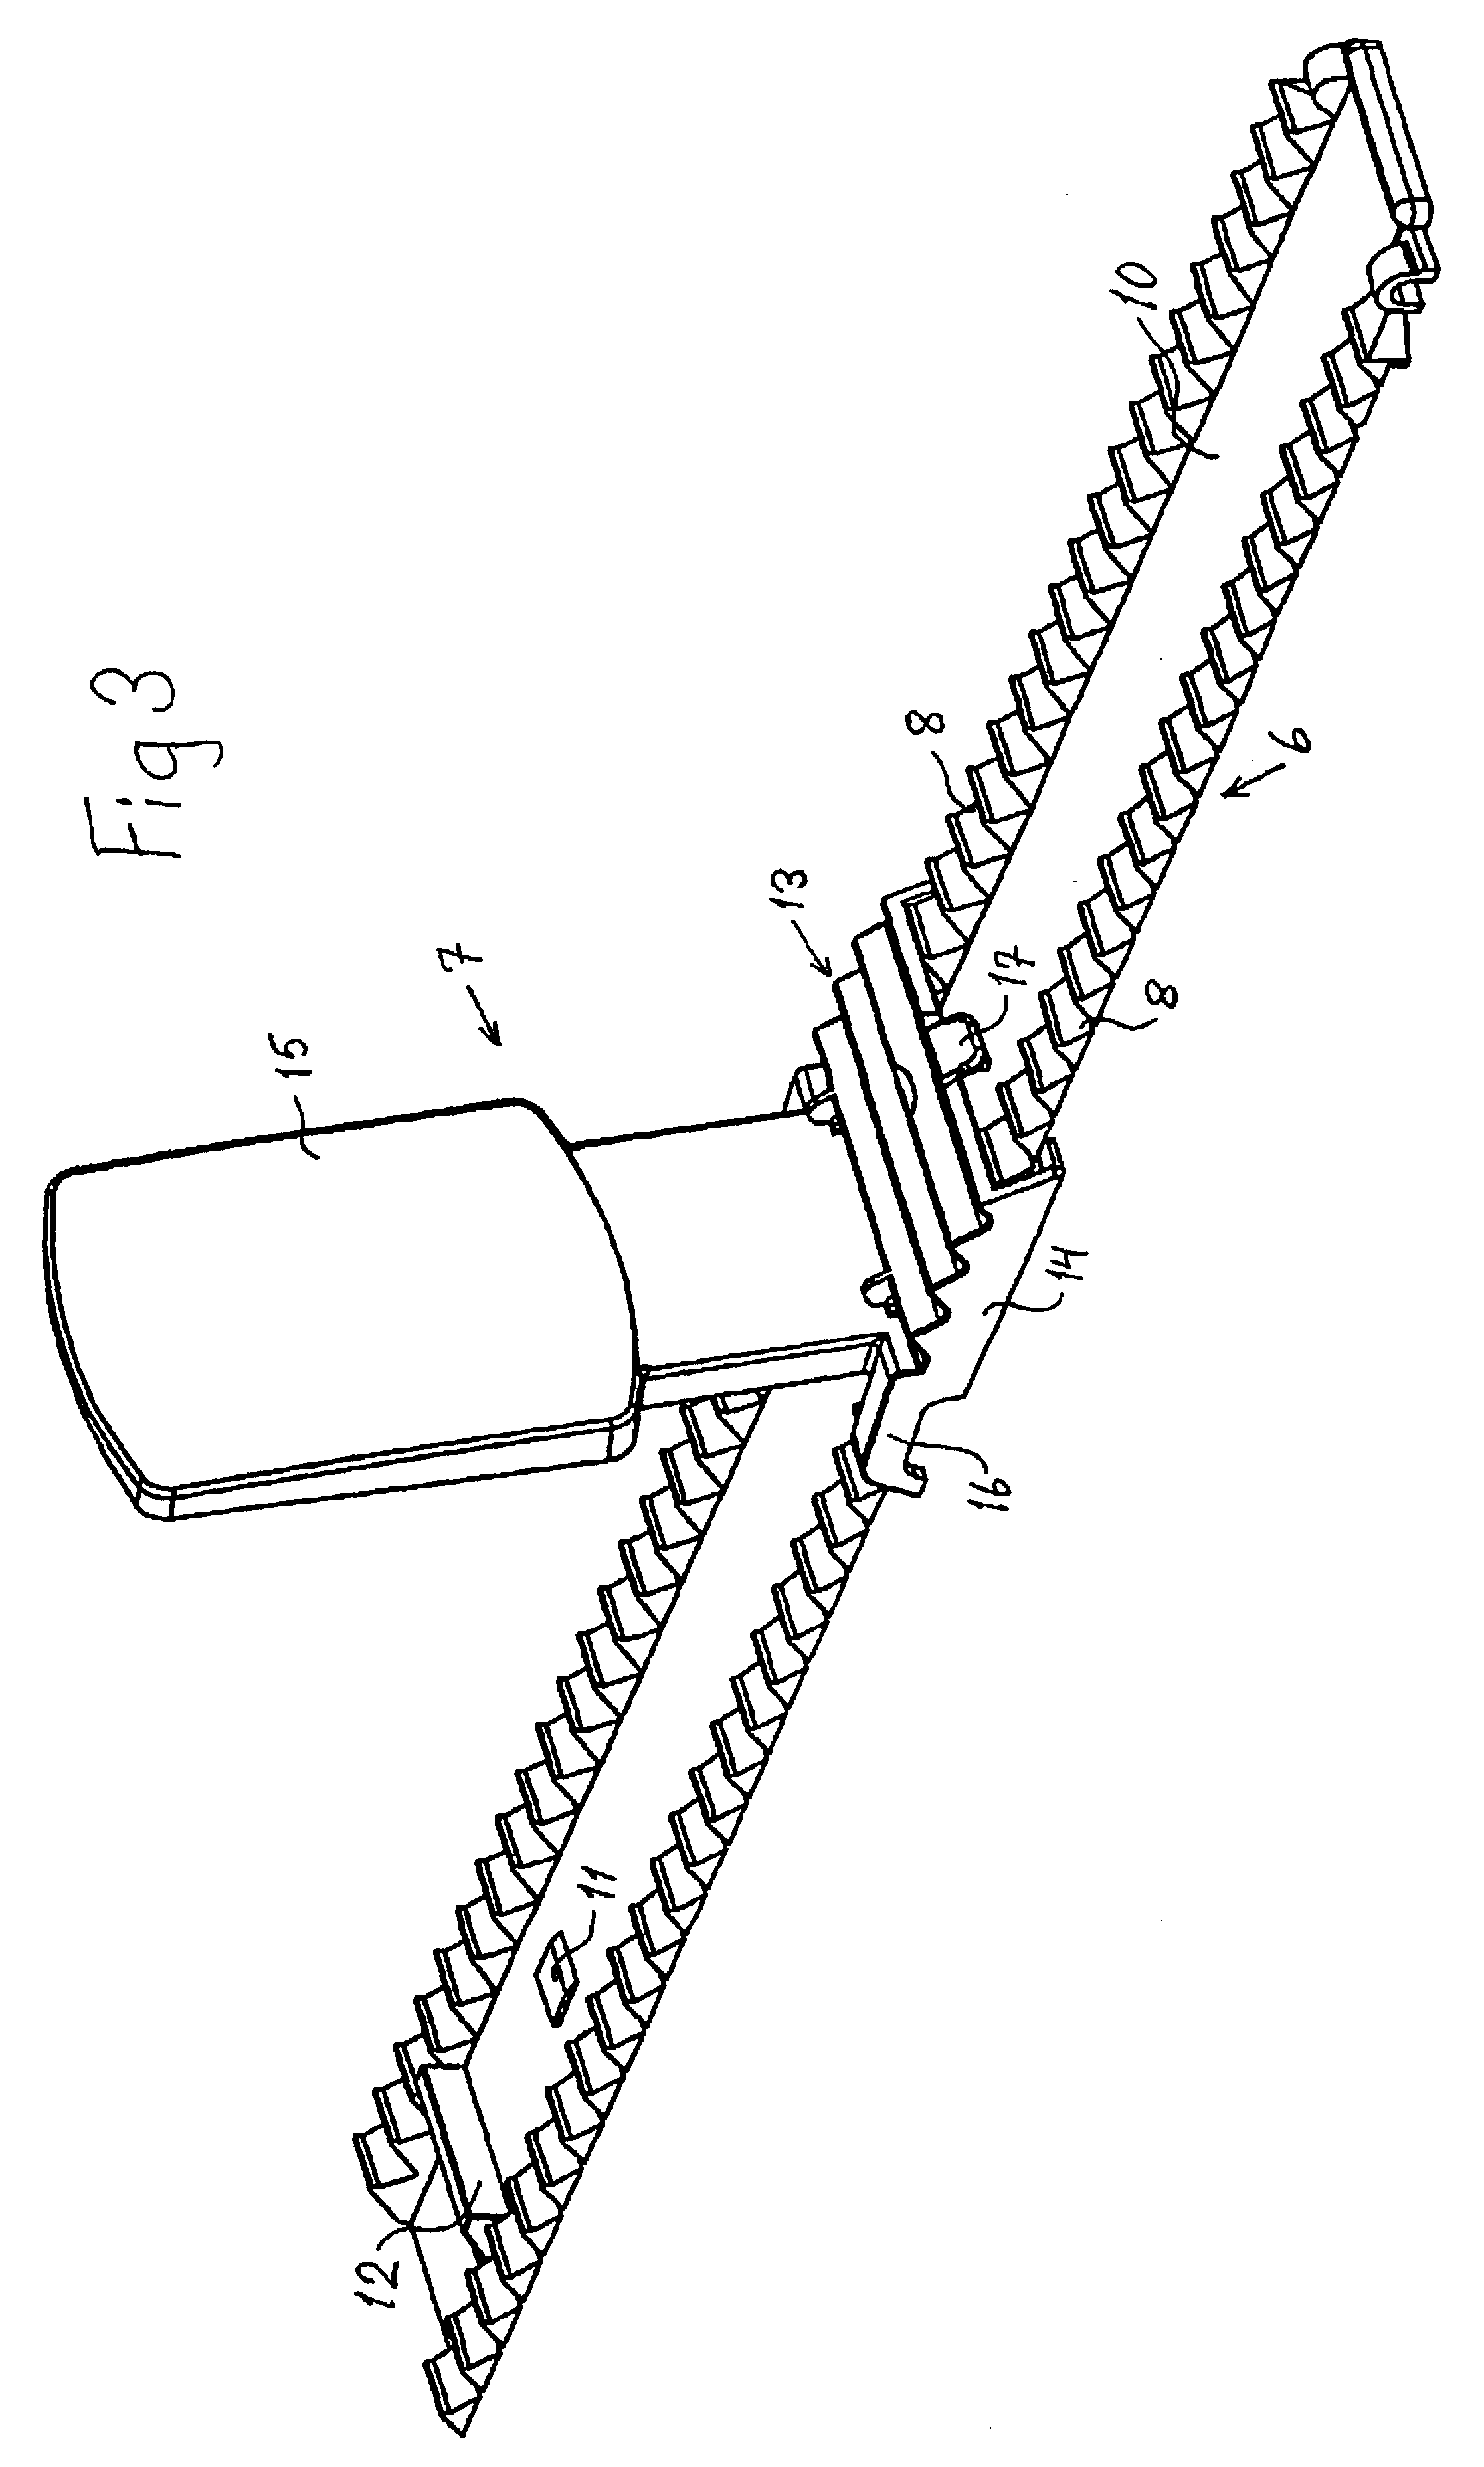 Arrangement in a supporting device for goods